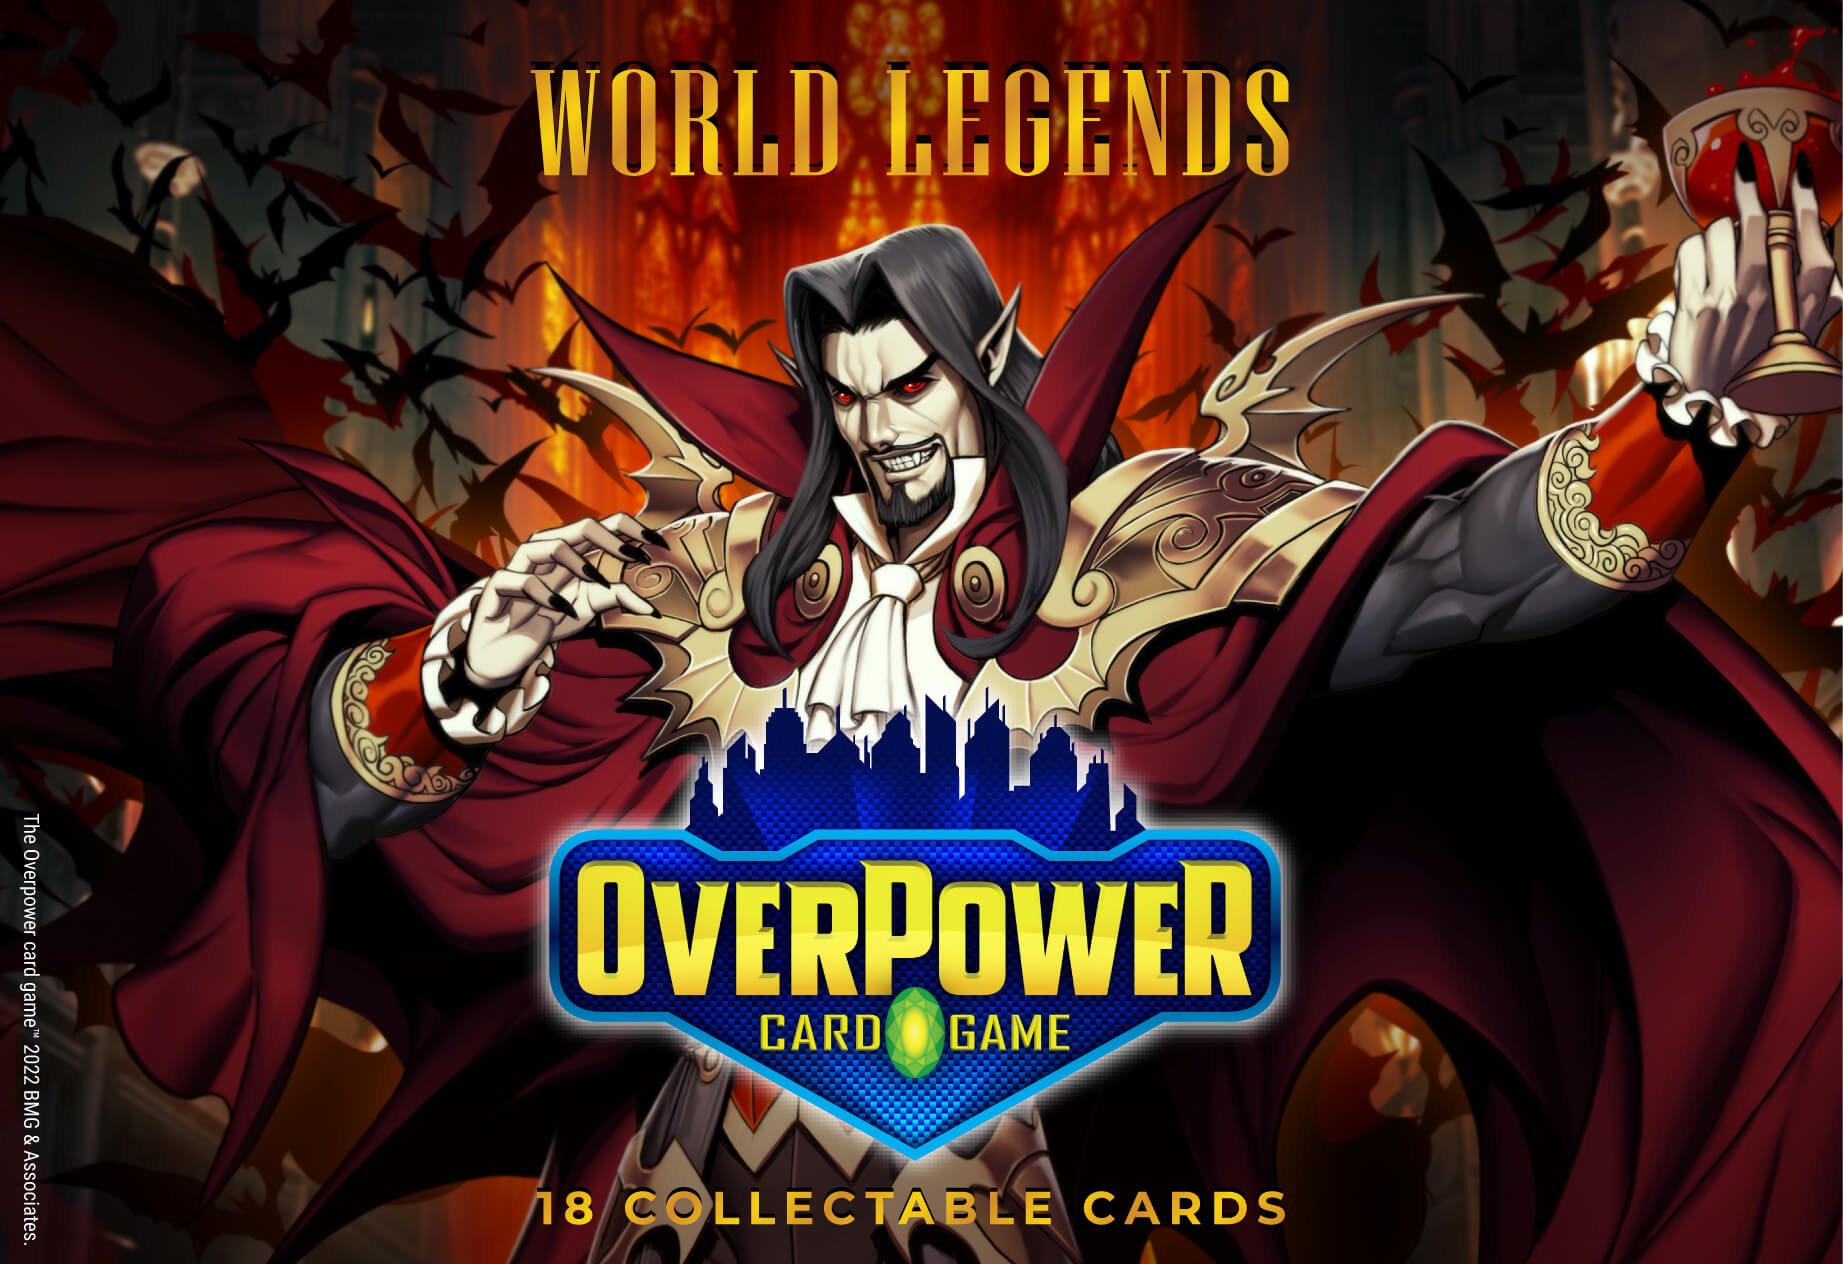 Introducing the World Legends Promo – Any Hero Essentials.